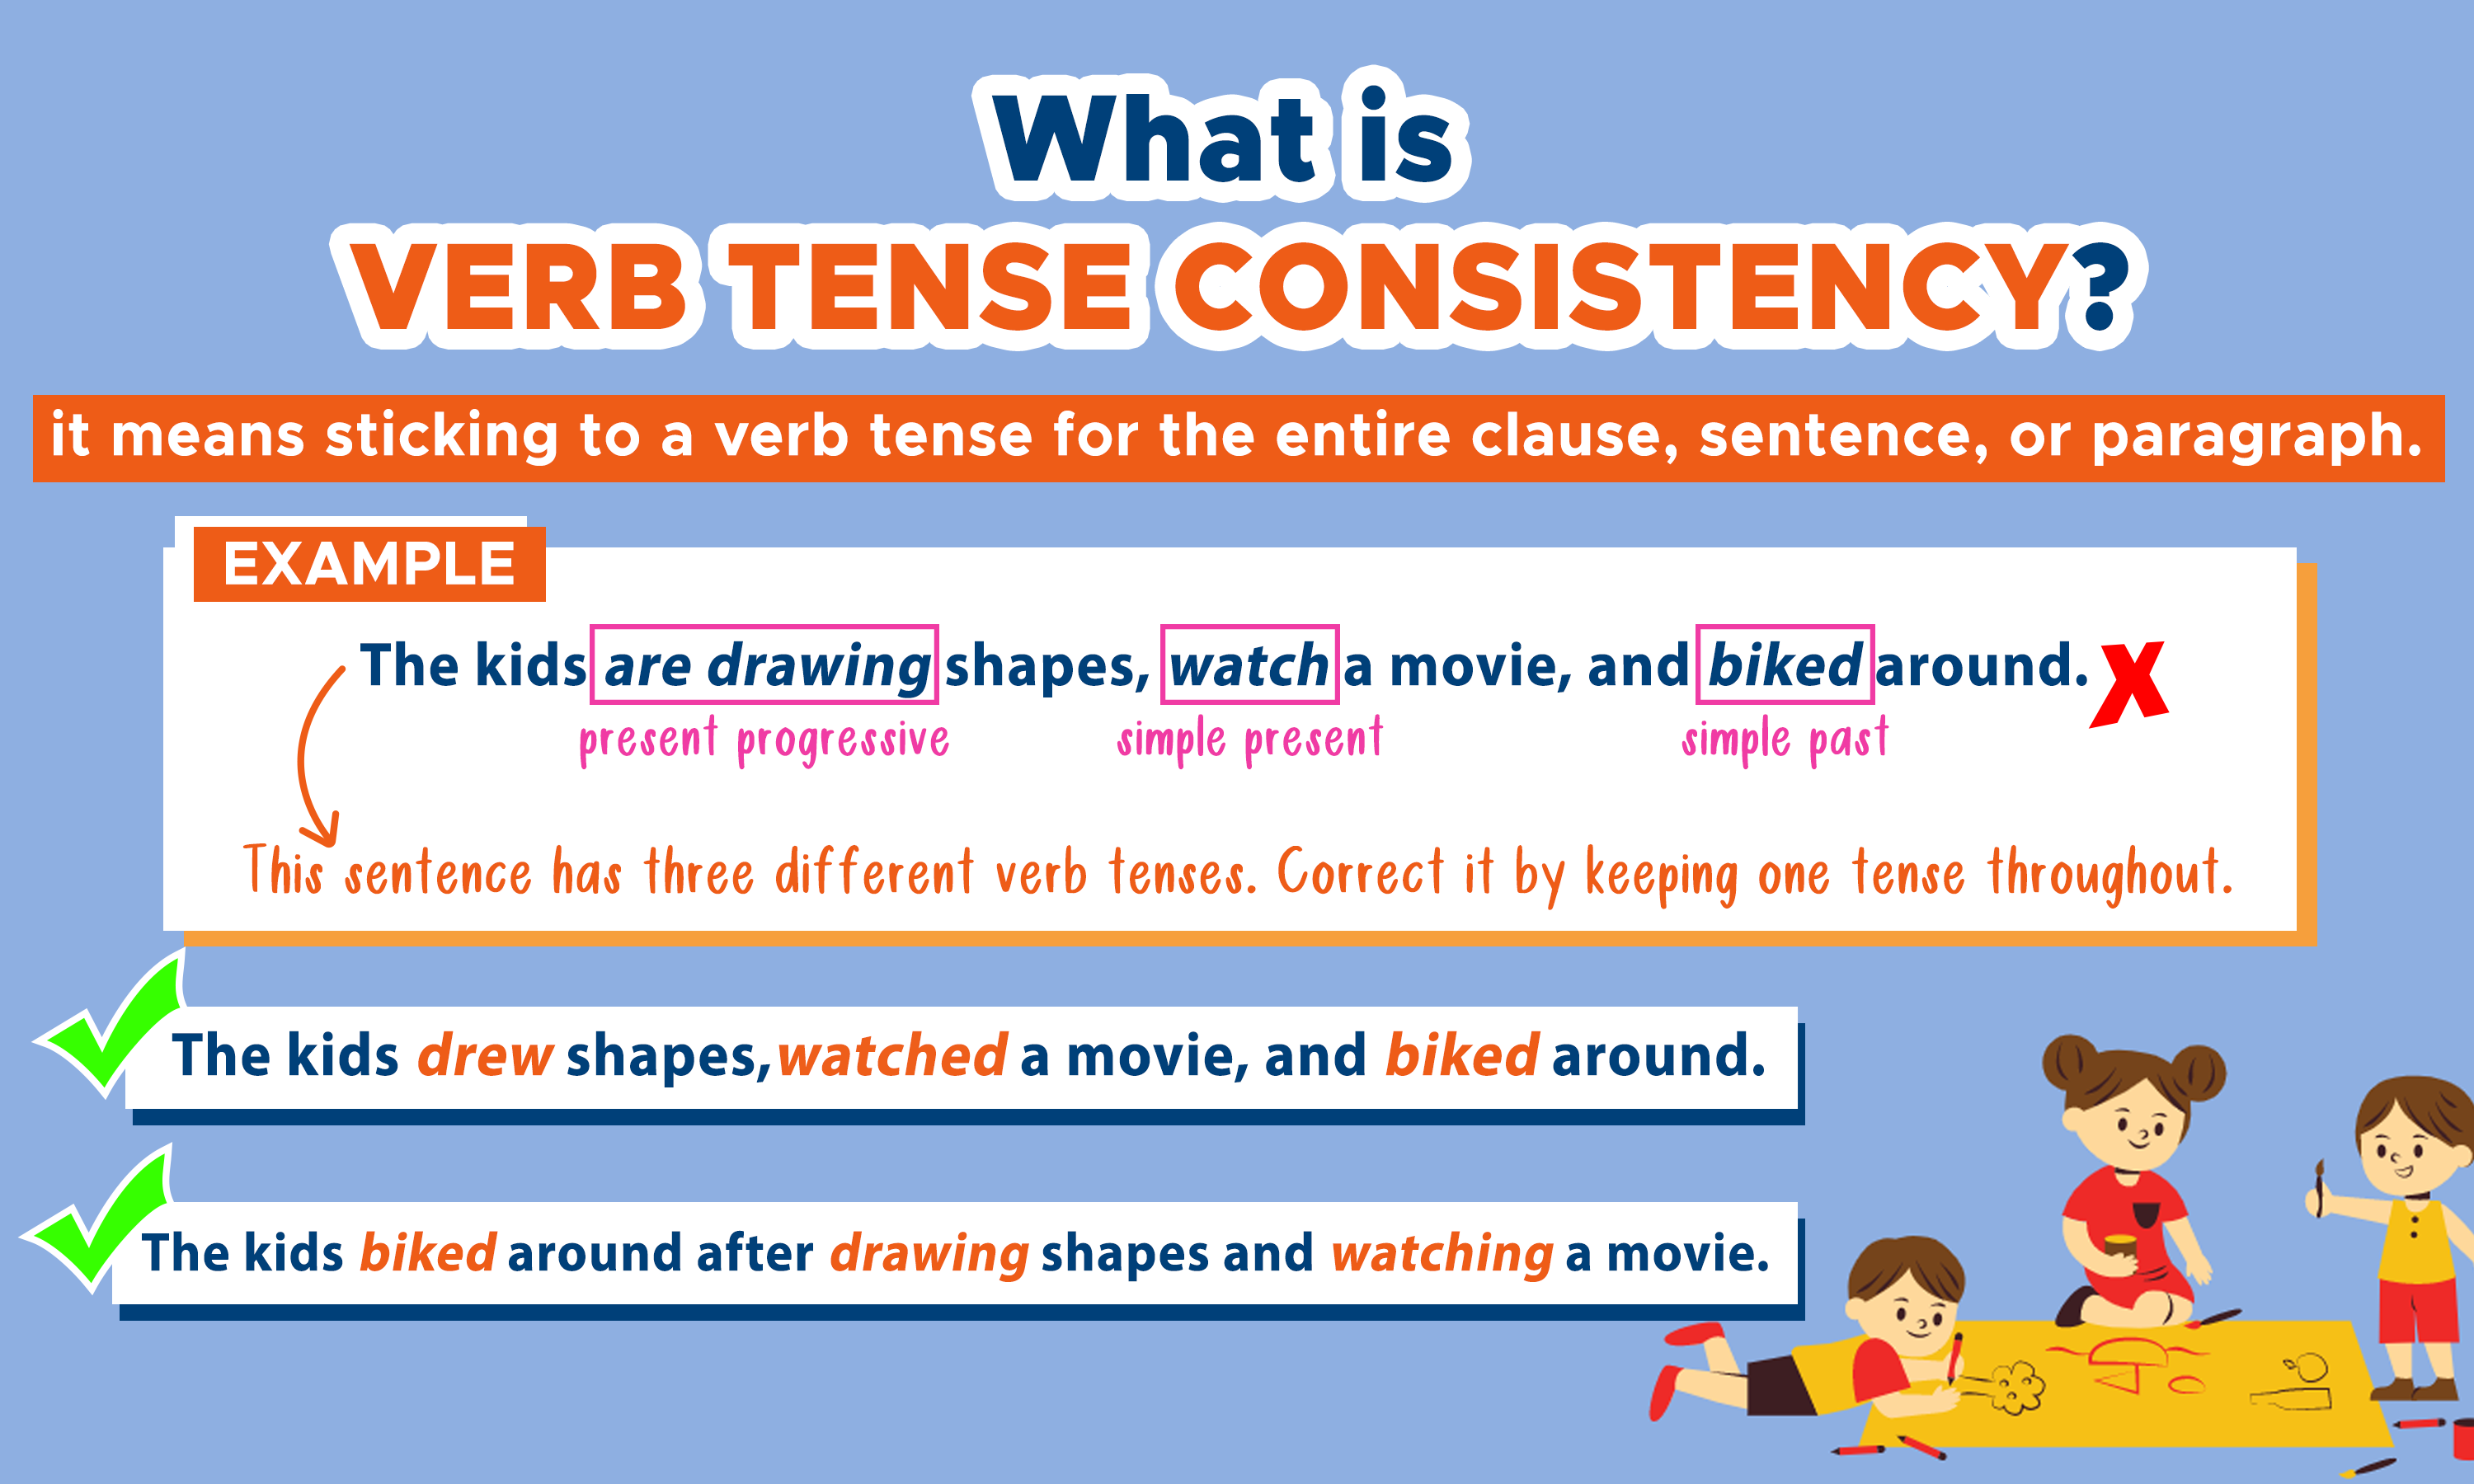 What Are Verb Tenses? Definition and Usage Explained